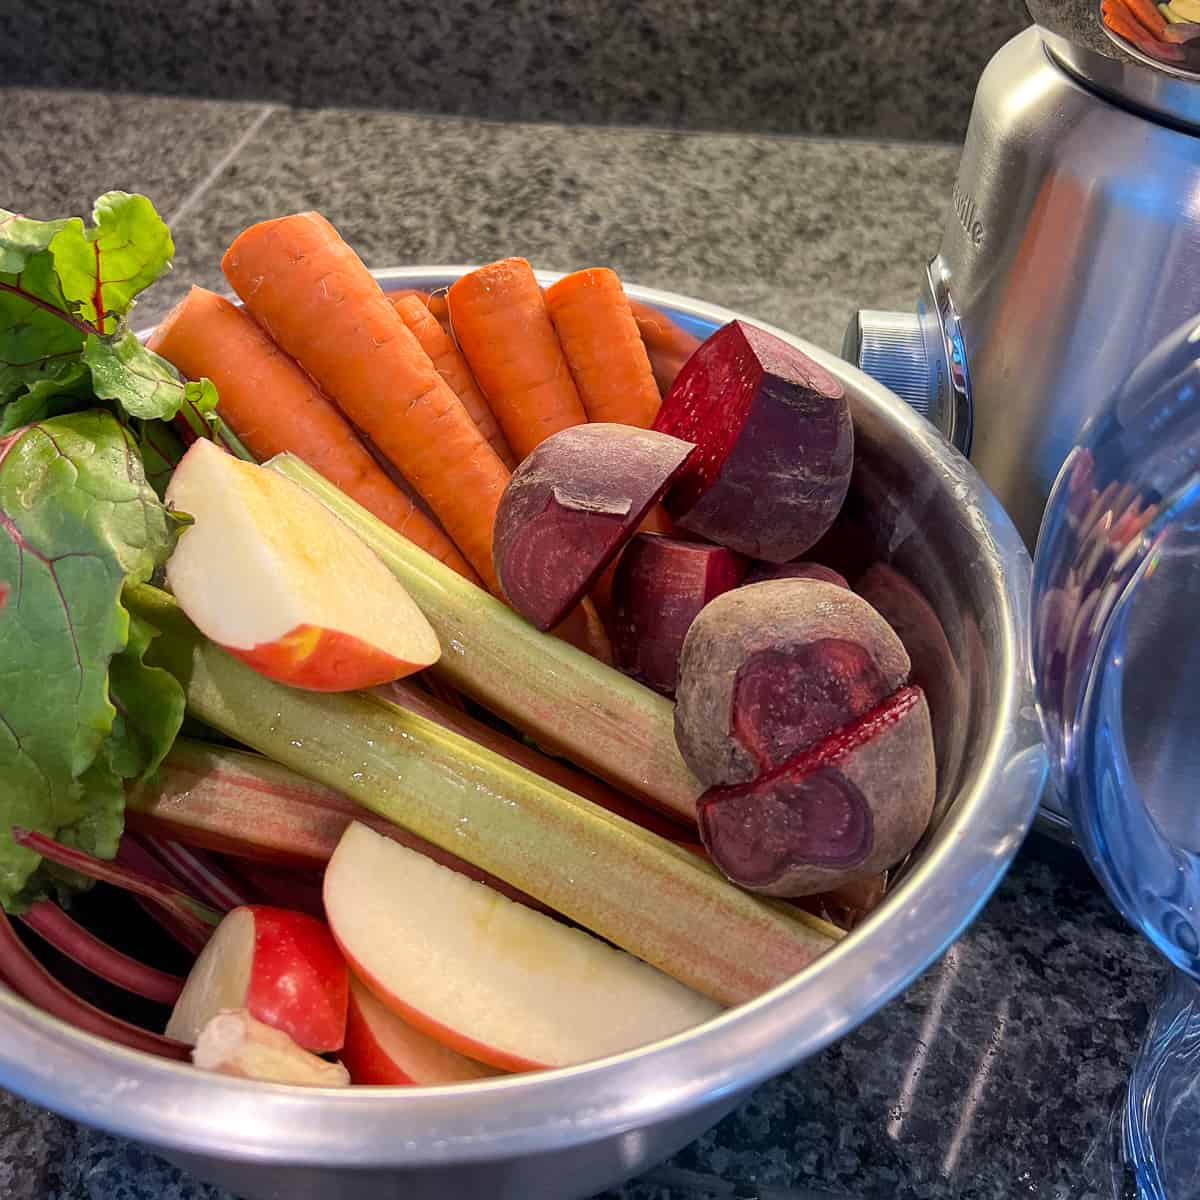 top side view of raw beets, carrots, rhubarb, apple and ginger in a large mixing bowl next to a stainless steel juicer